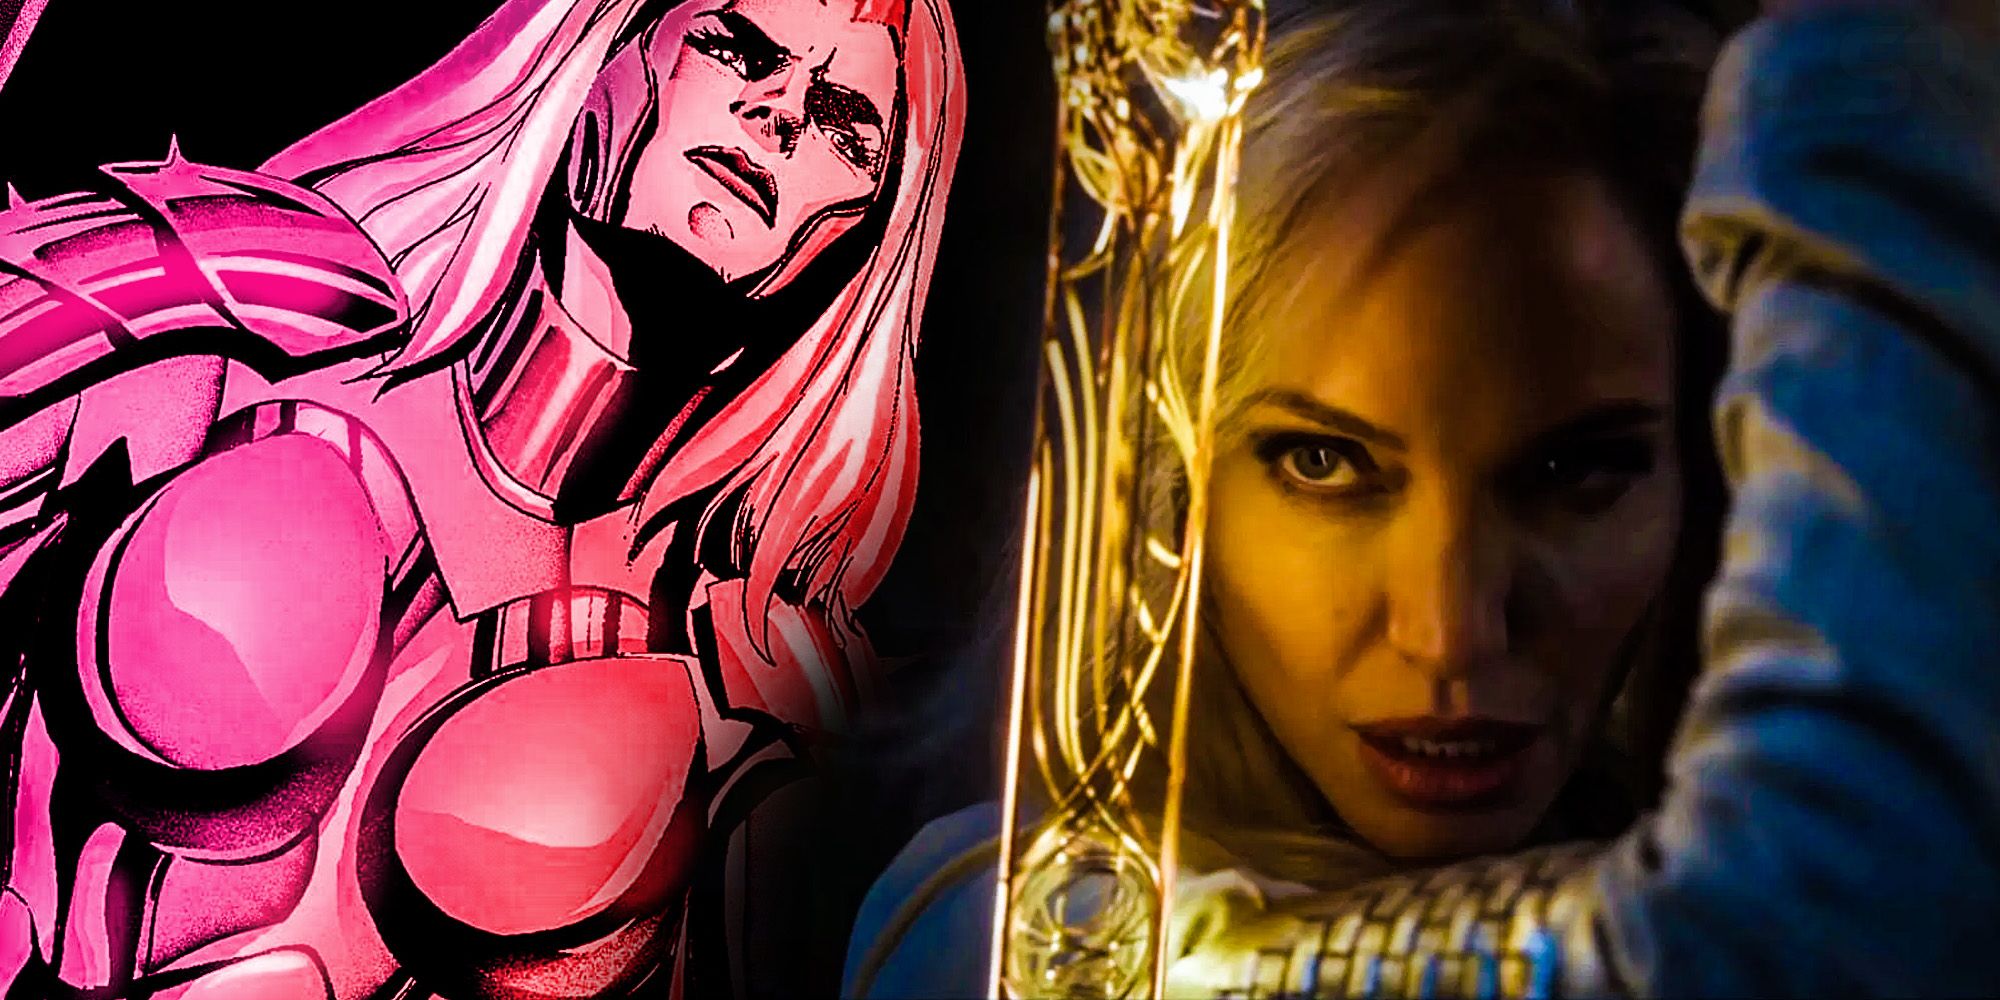 What The Sword In The Eternals Trailer Is Thena's Power Explained